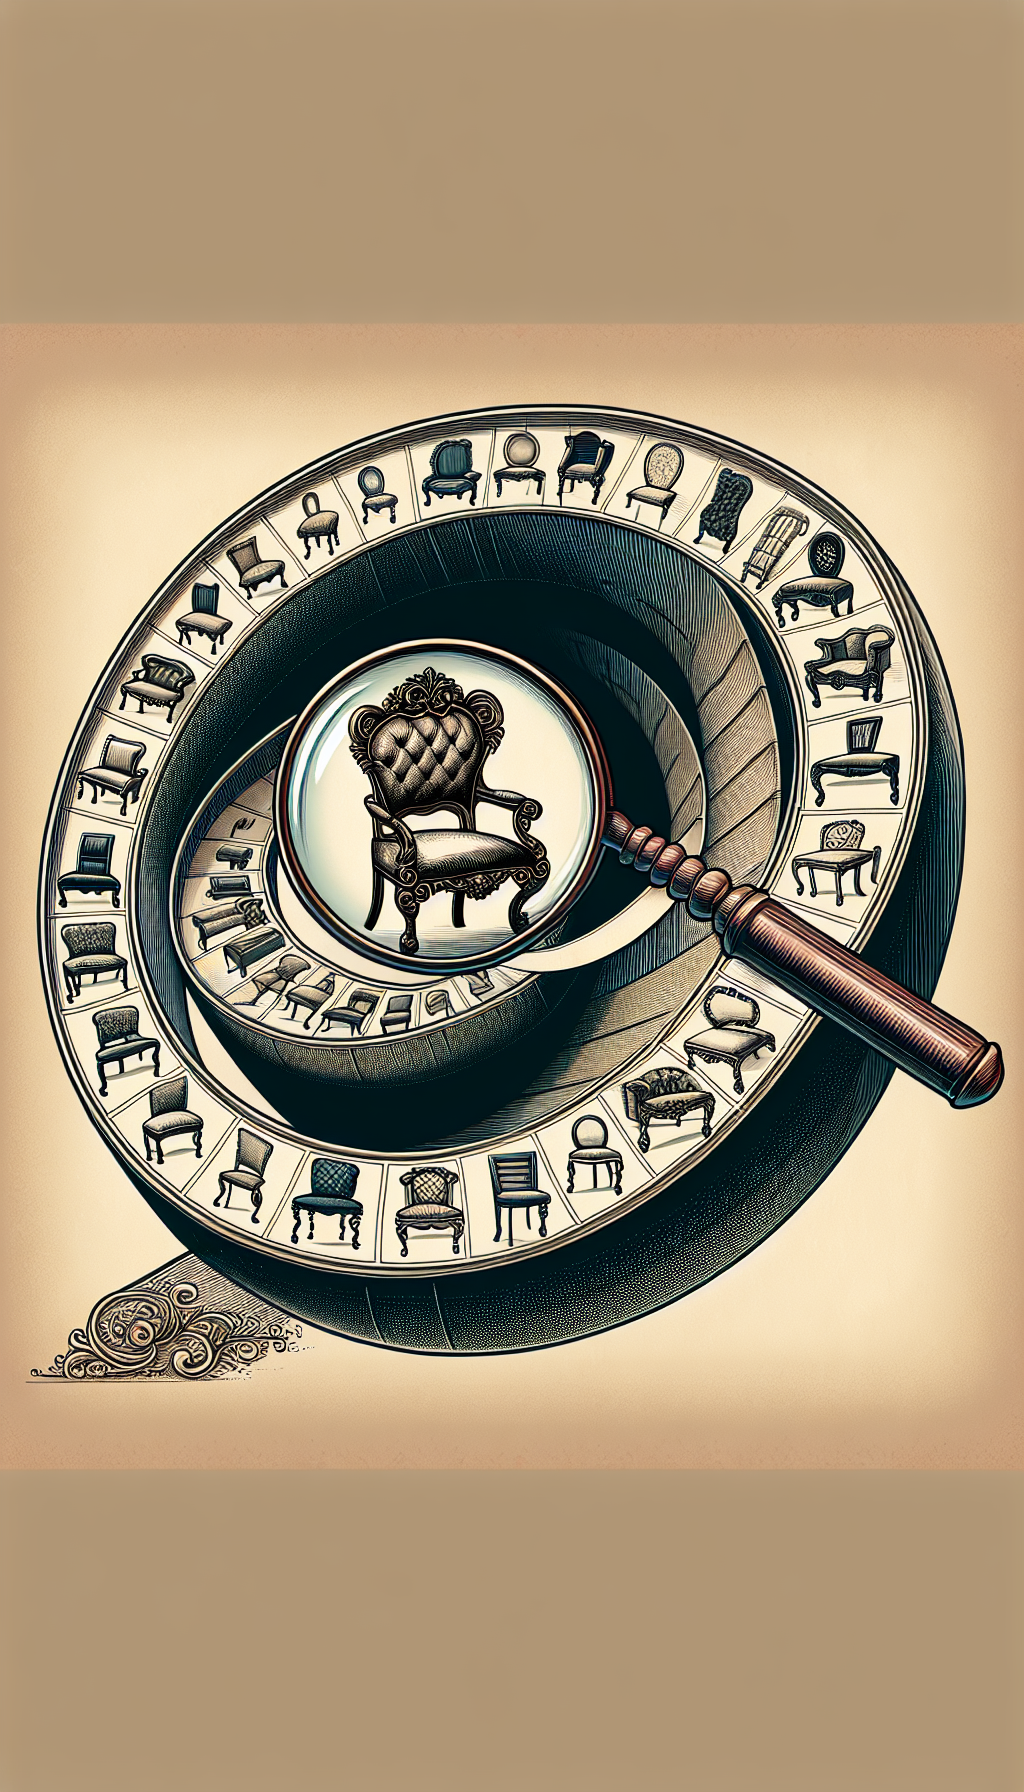 An illustration displays a spiraling timeline unfurling like a scroll, dotted with iconic chairs representing various historic styles. At the base, a magnifying glass hovers over an ornate Victorian armchair, symbolizing the antique chair identification guide. Beneath the glass, intricate details and style cues are subtly highlighted and labeled.

16:9